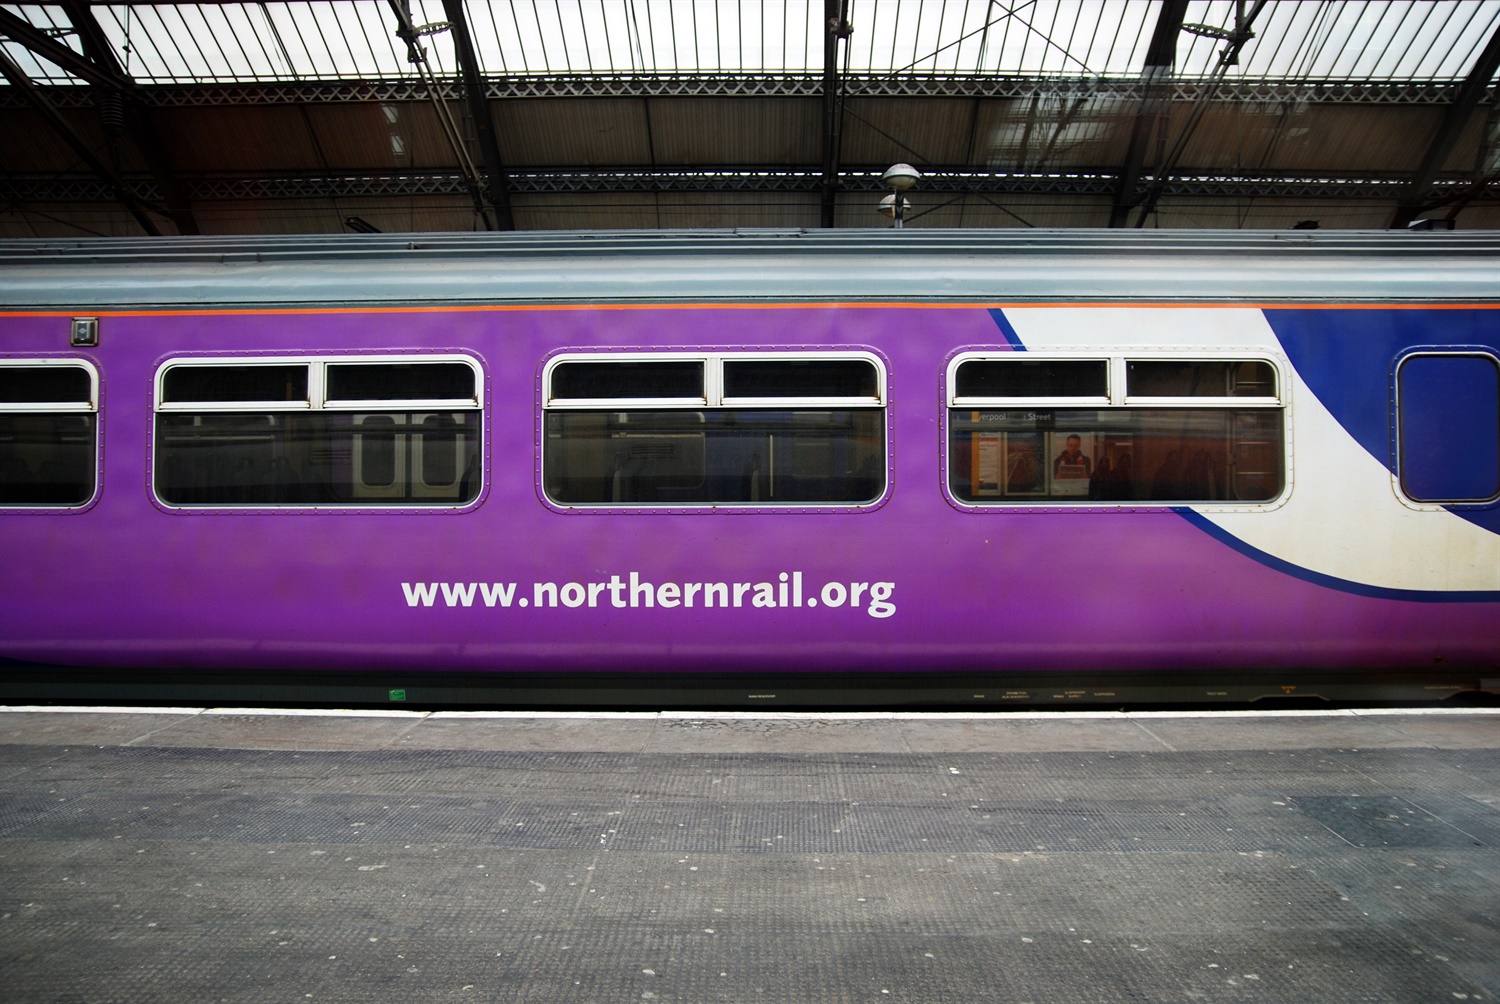 New six-carriage Northern trains pushed back two years due to delayed upgrade works